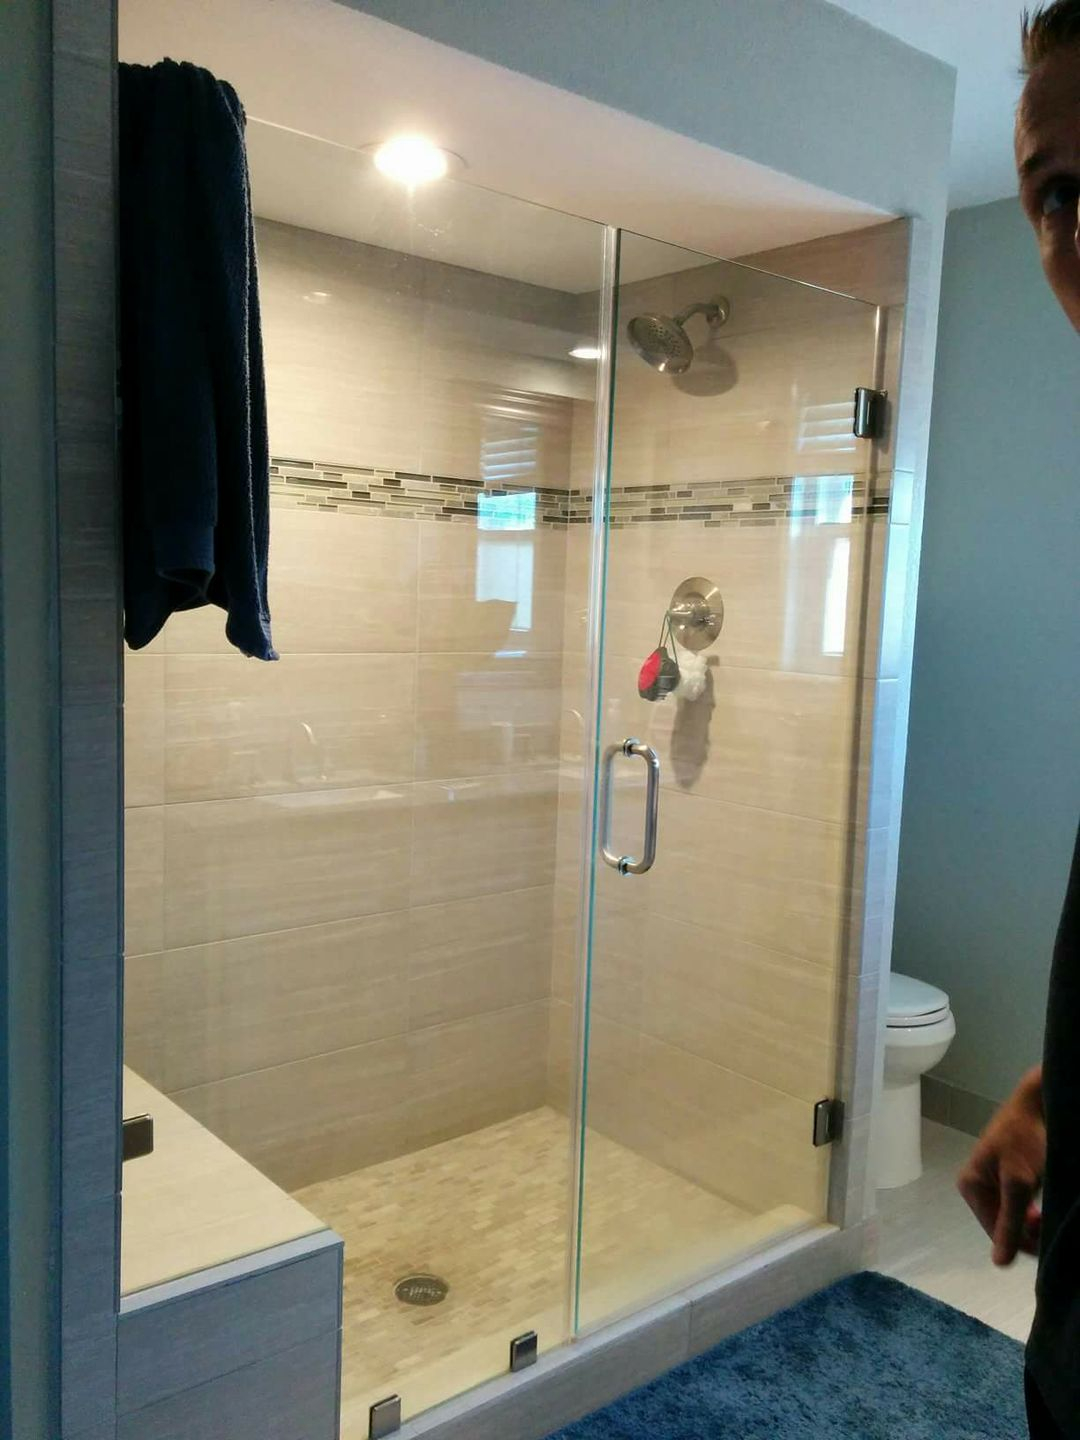 Nagel Shower Jps Finished With Glass Seabrook League City Kemah pertaining to measurements 1080 X 1440